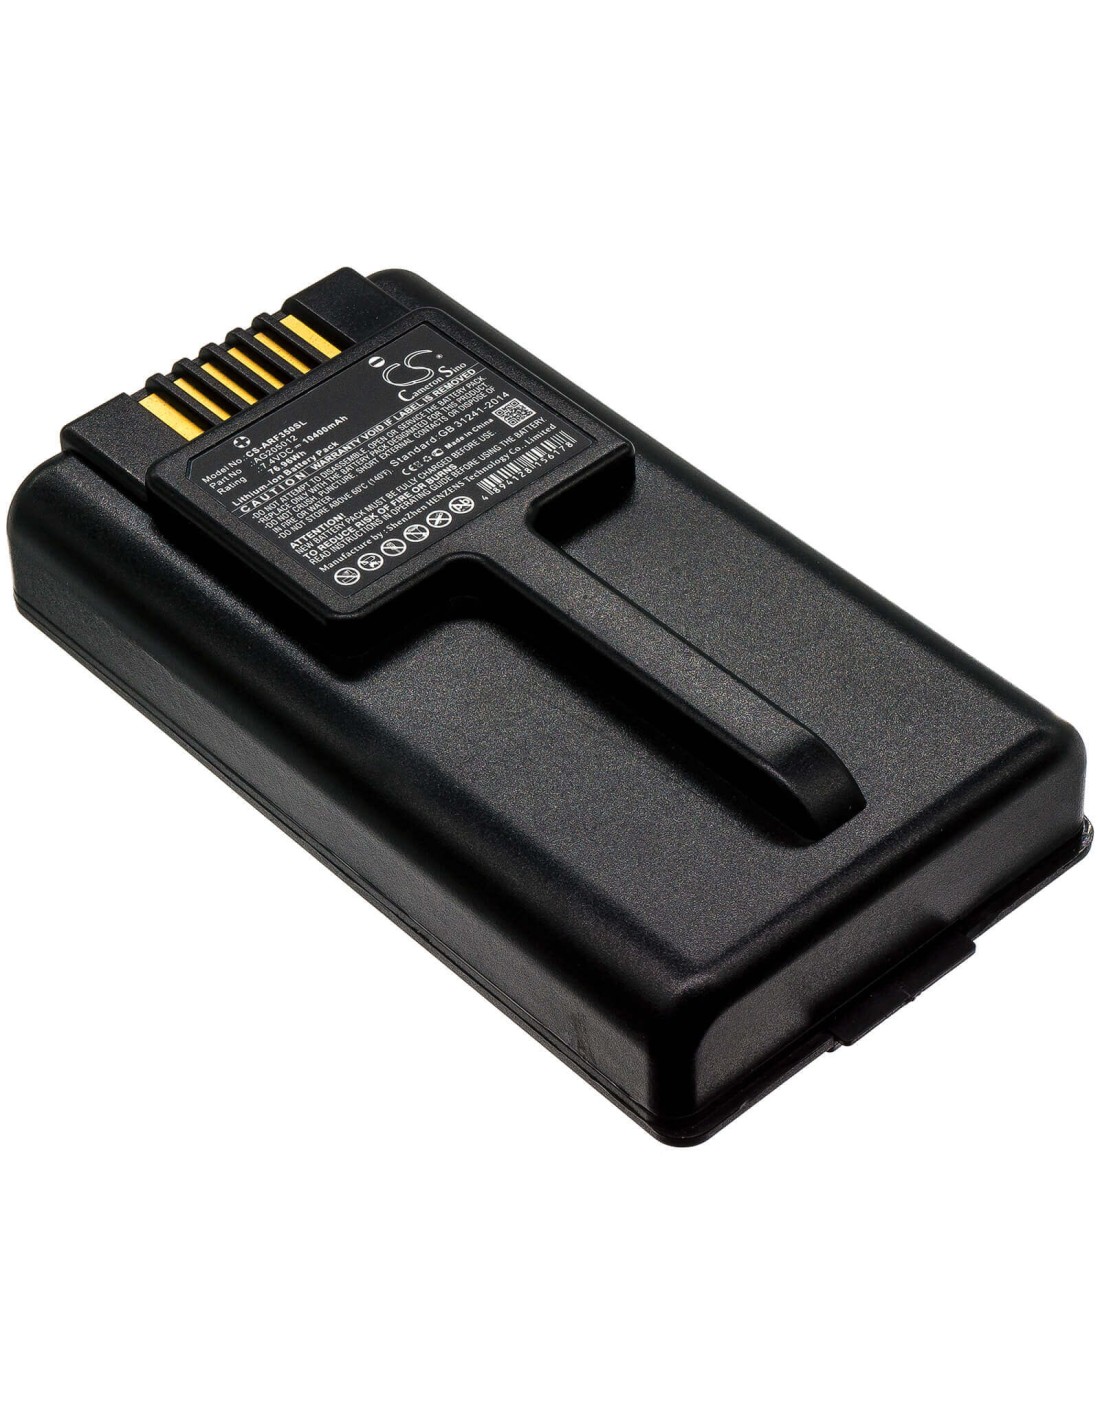 Battery for Aeroflex, Ifr, Marconi 7.4V, 10400mAh - 76.96Wh